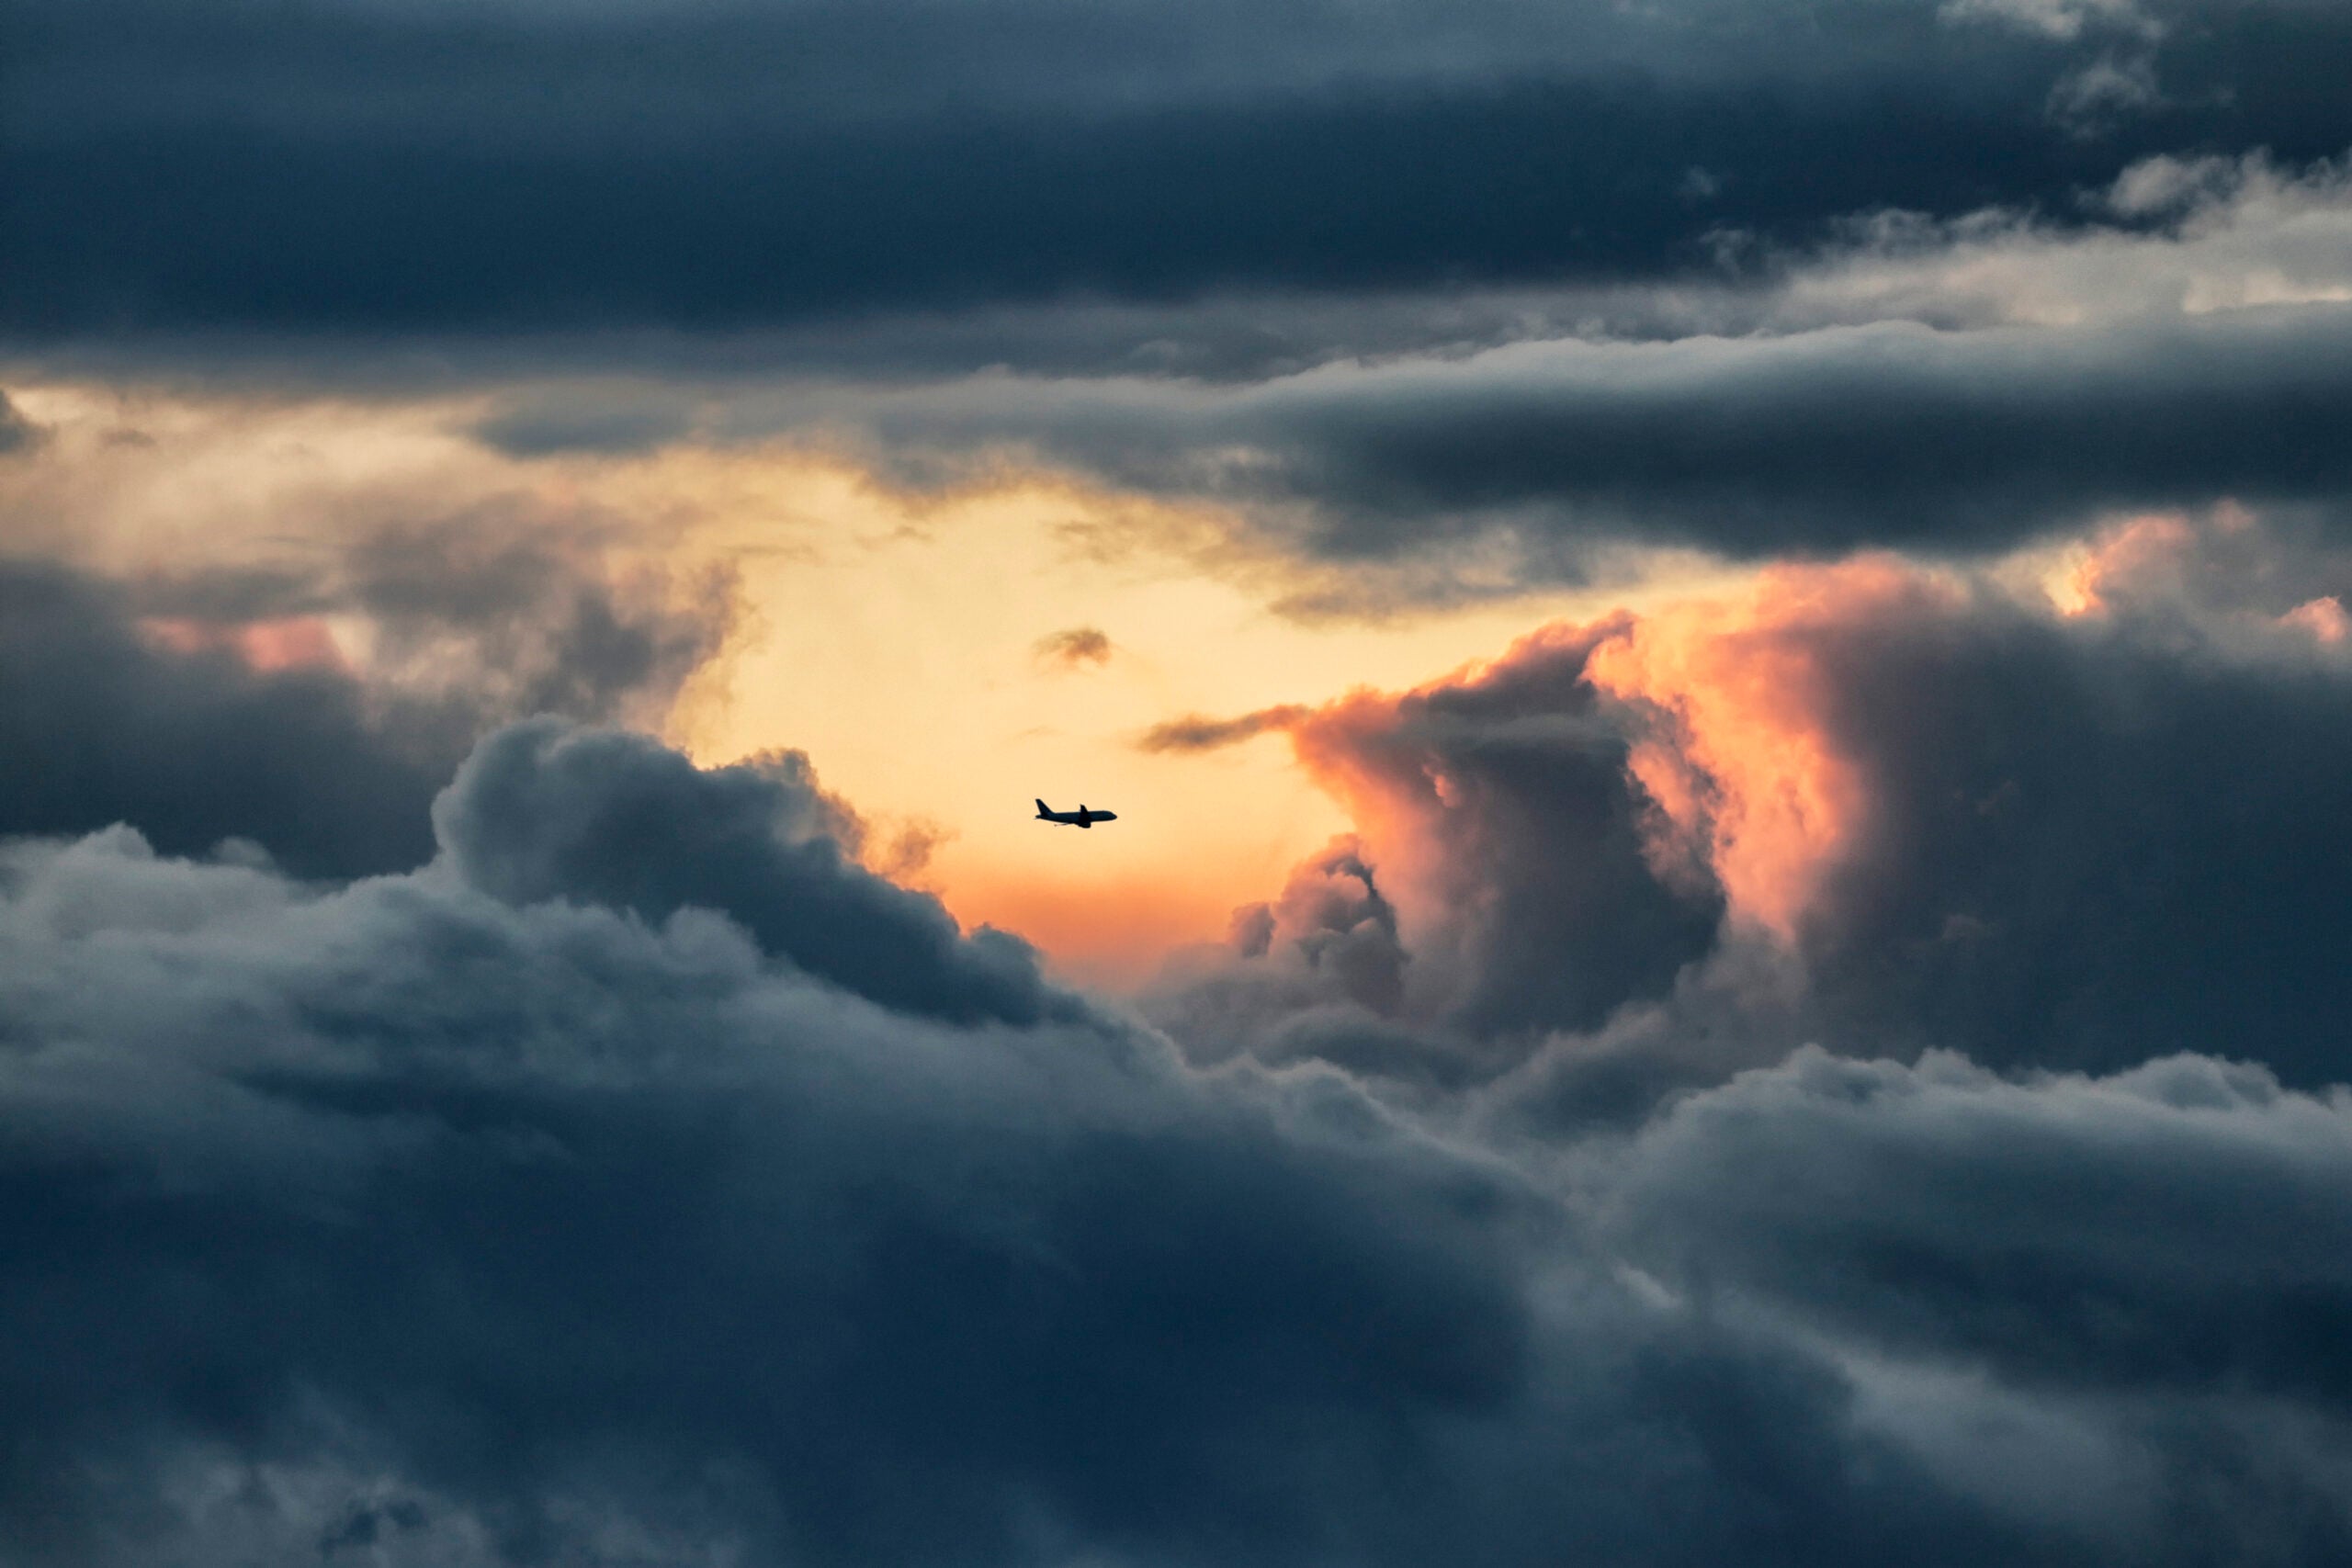 An airliner throughout stormy clouds in Normandy, France